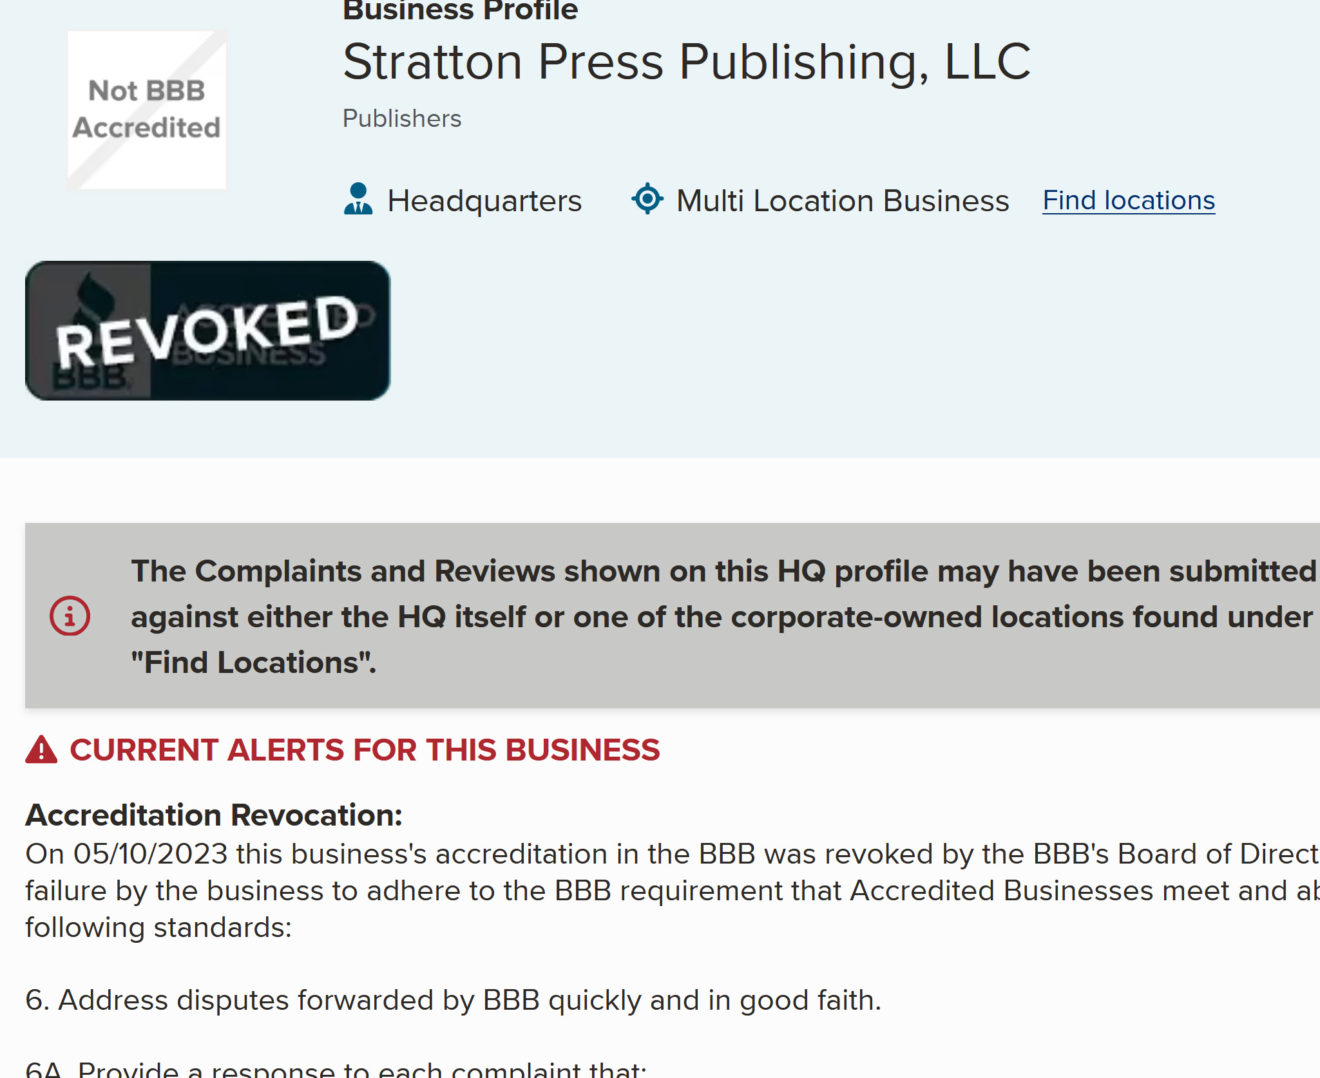 OUCH! The BBB Has REVOKED Stratton Press Publishing's Accreditation AND Given Them an F Rating. Find out why!